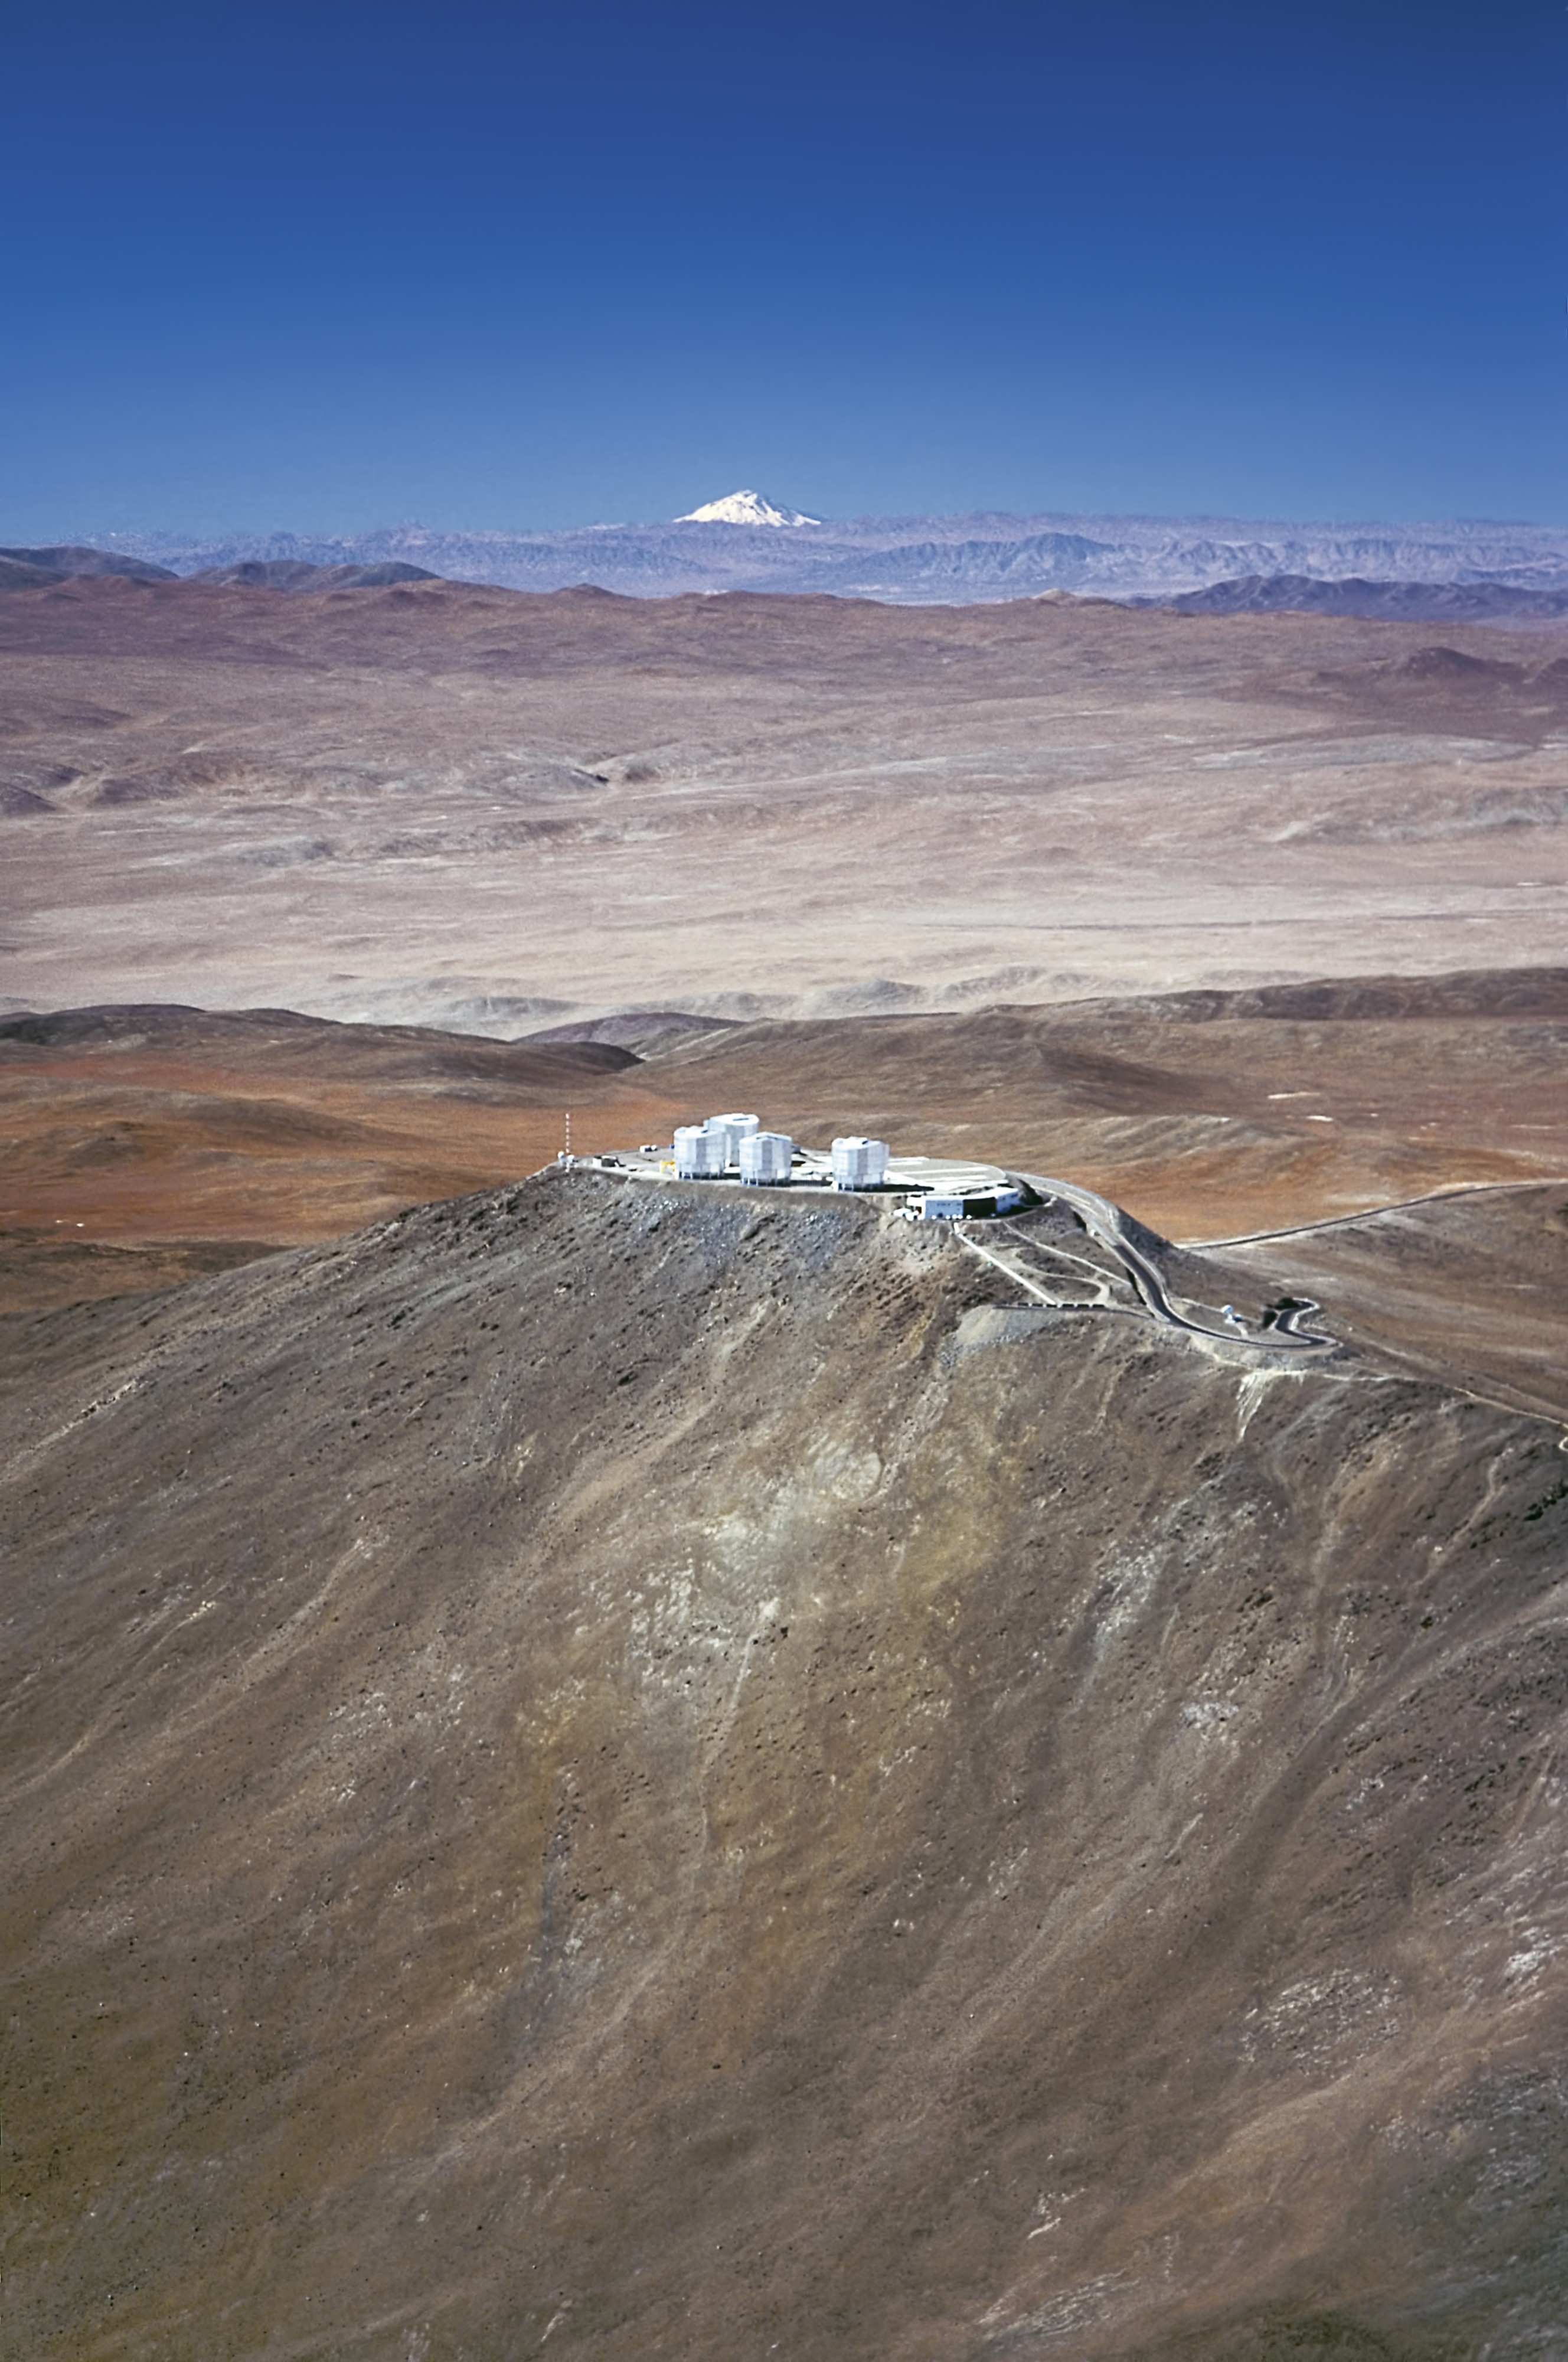 ESO’s Paranal Observatory and the Volcano Llullaillaco